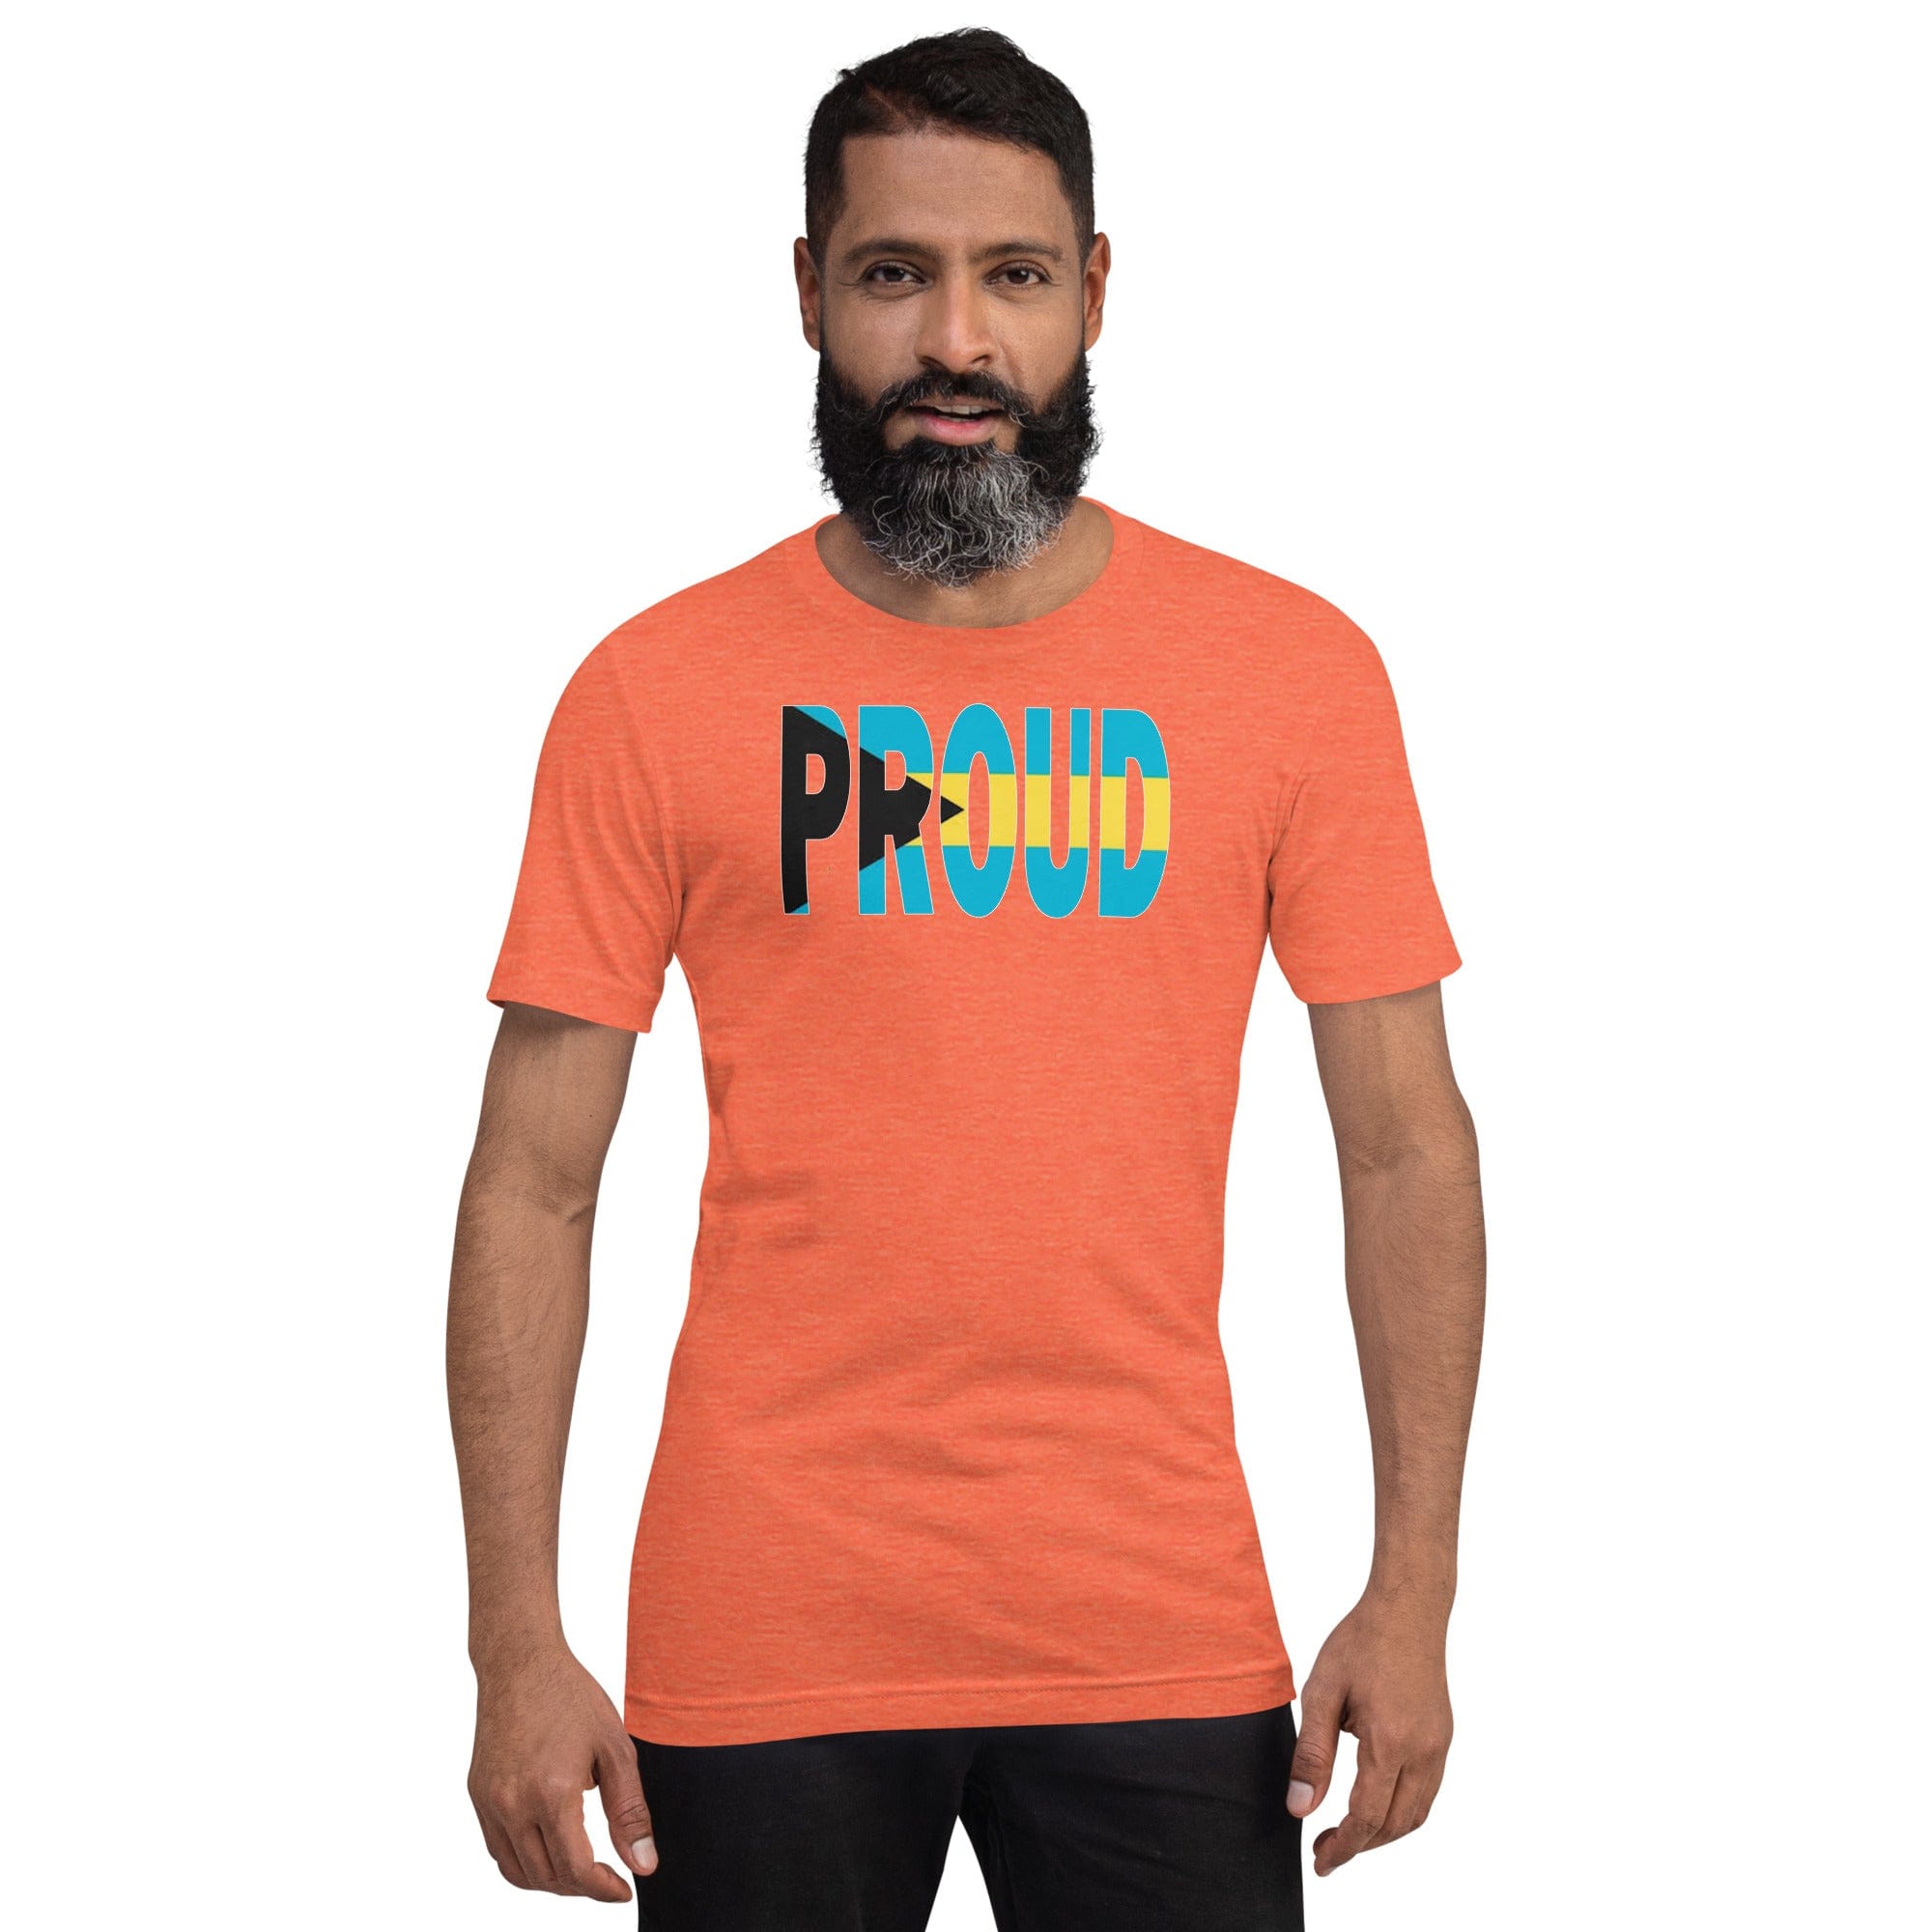 Bahamas Flag designed to spell Proud on a orange color t-shirt worn by a black man.